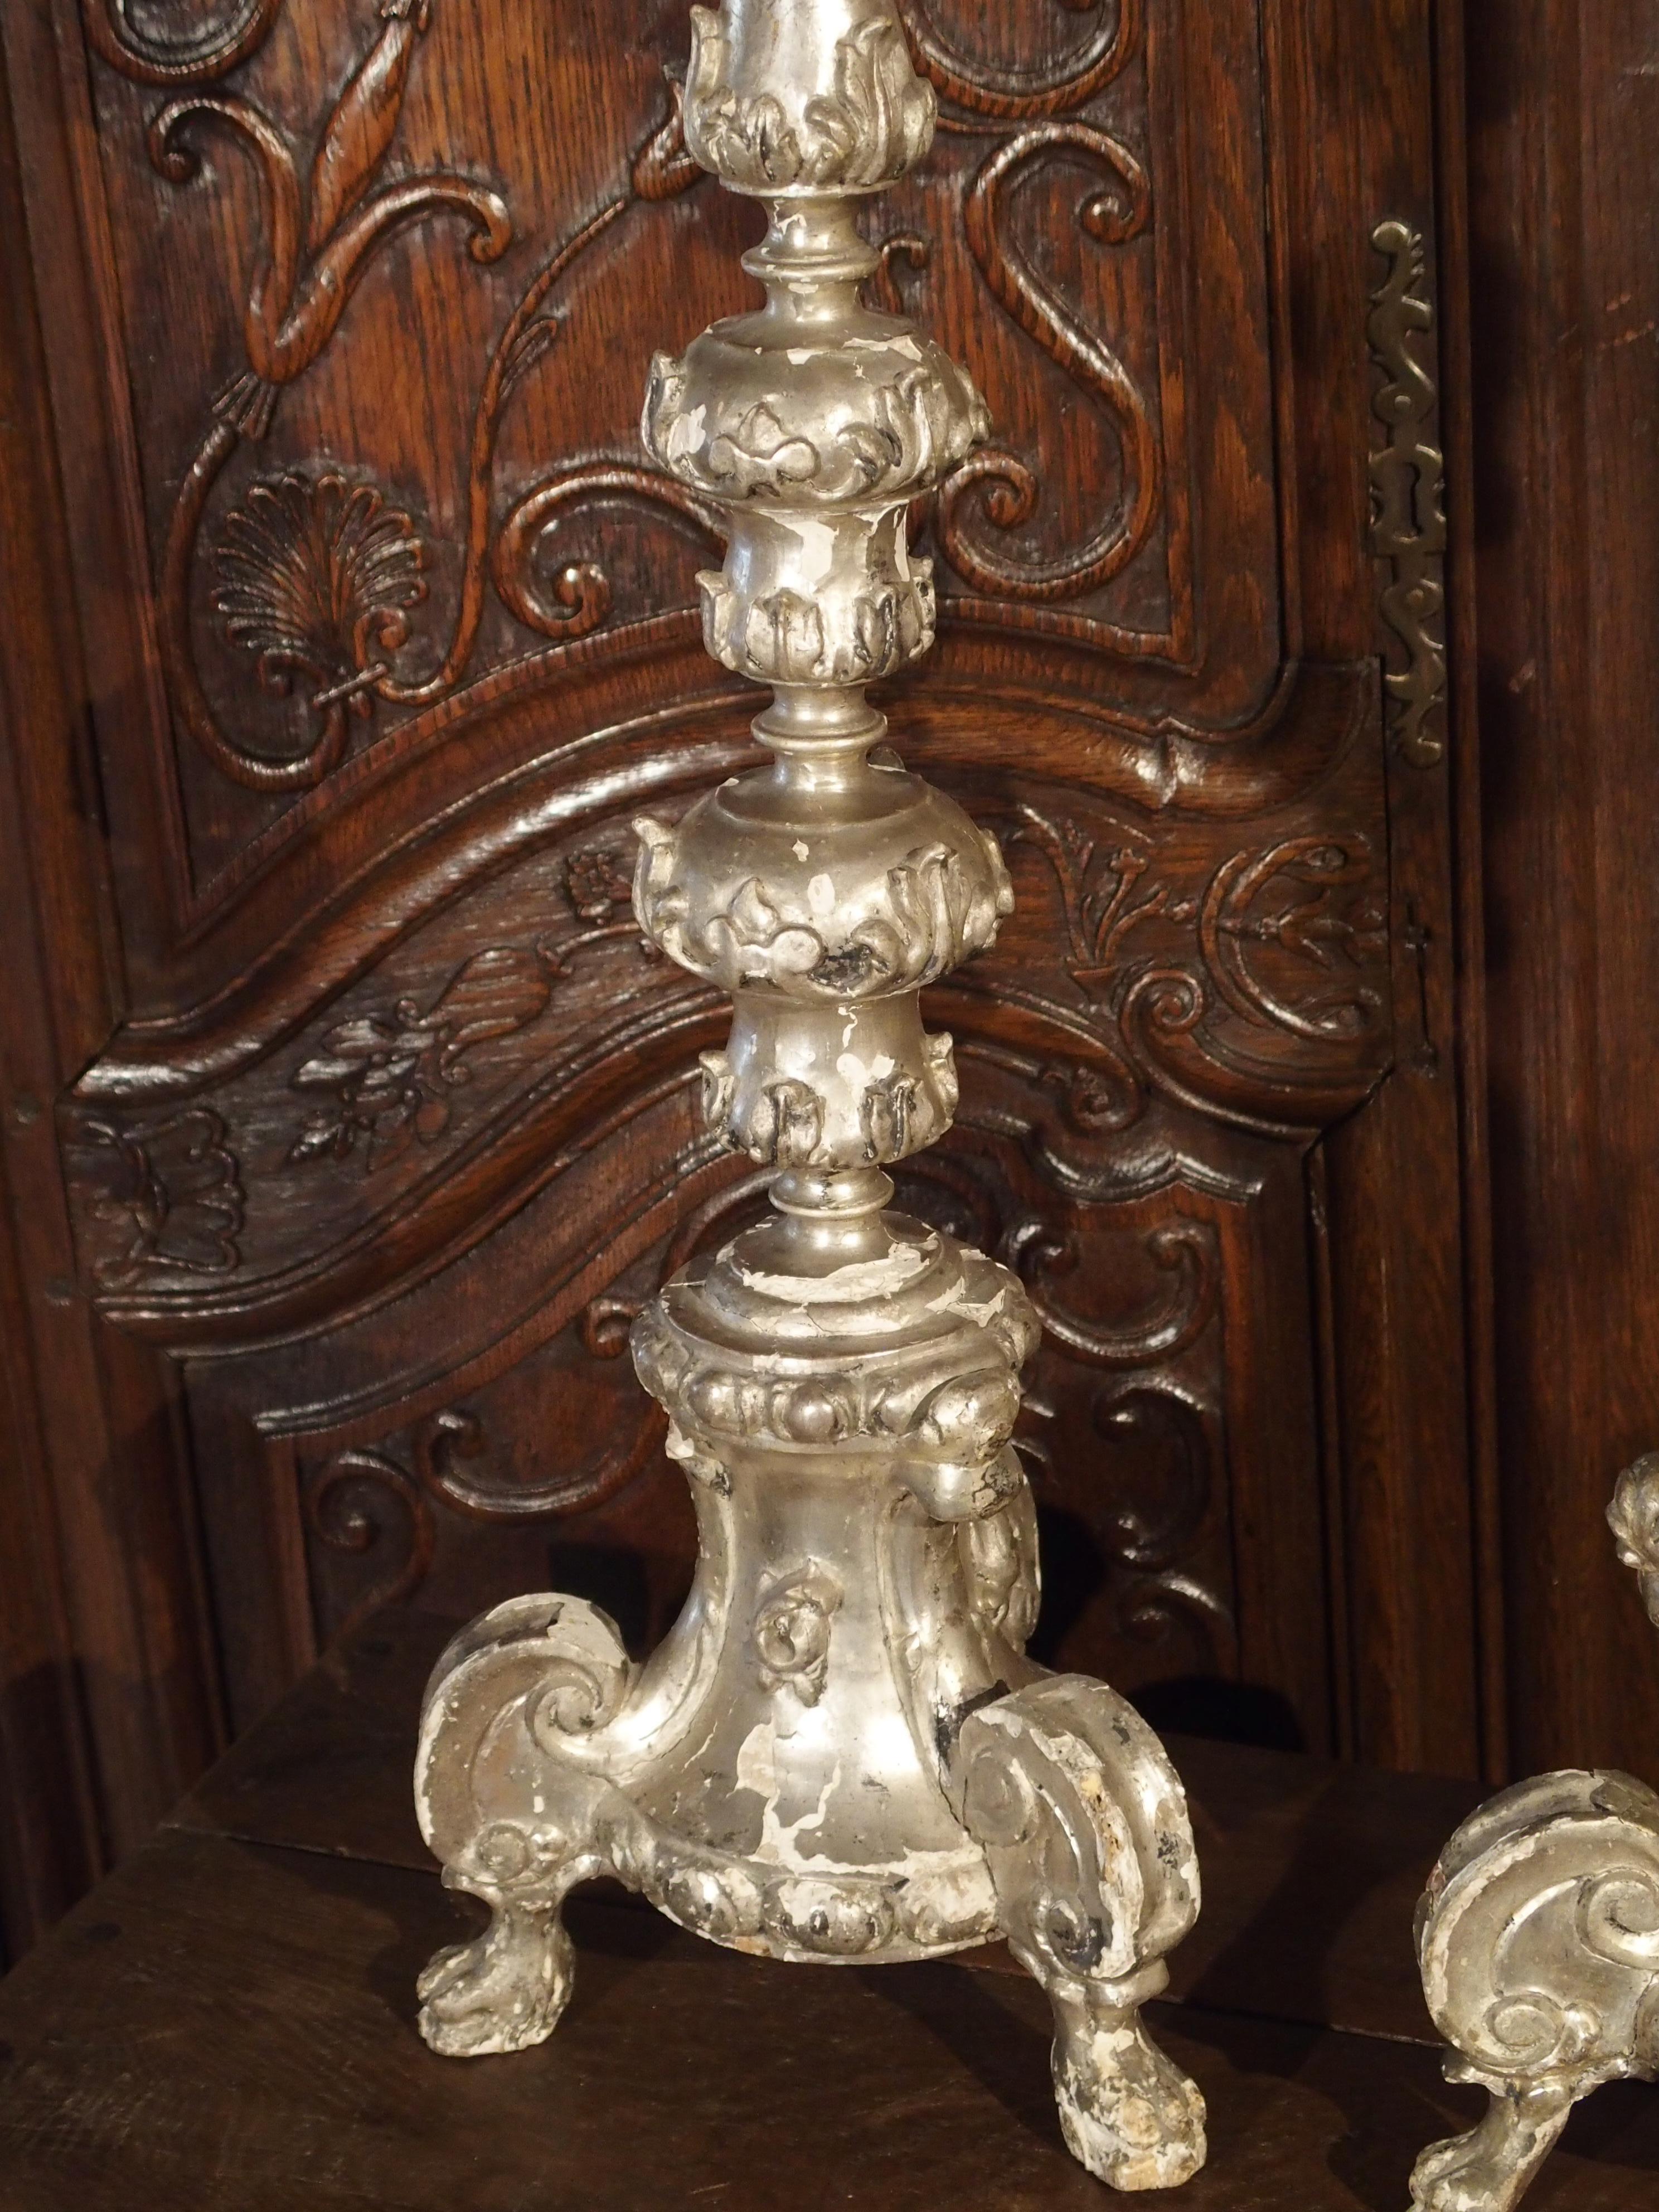 These tall silverleaf candlesticks date to the Baroque period of Italy, circa 1680.The tall shaped and turned stems all rest upon a tripod base with projecting C-scrolls and paw feet. The motifs are primarily varying forms of the acanthus leaf,